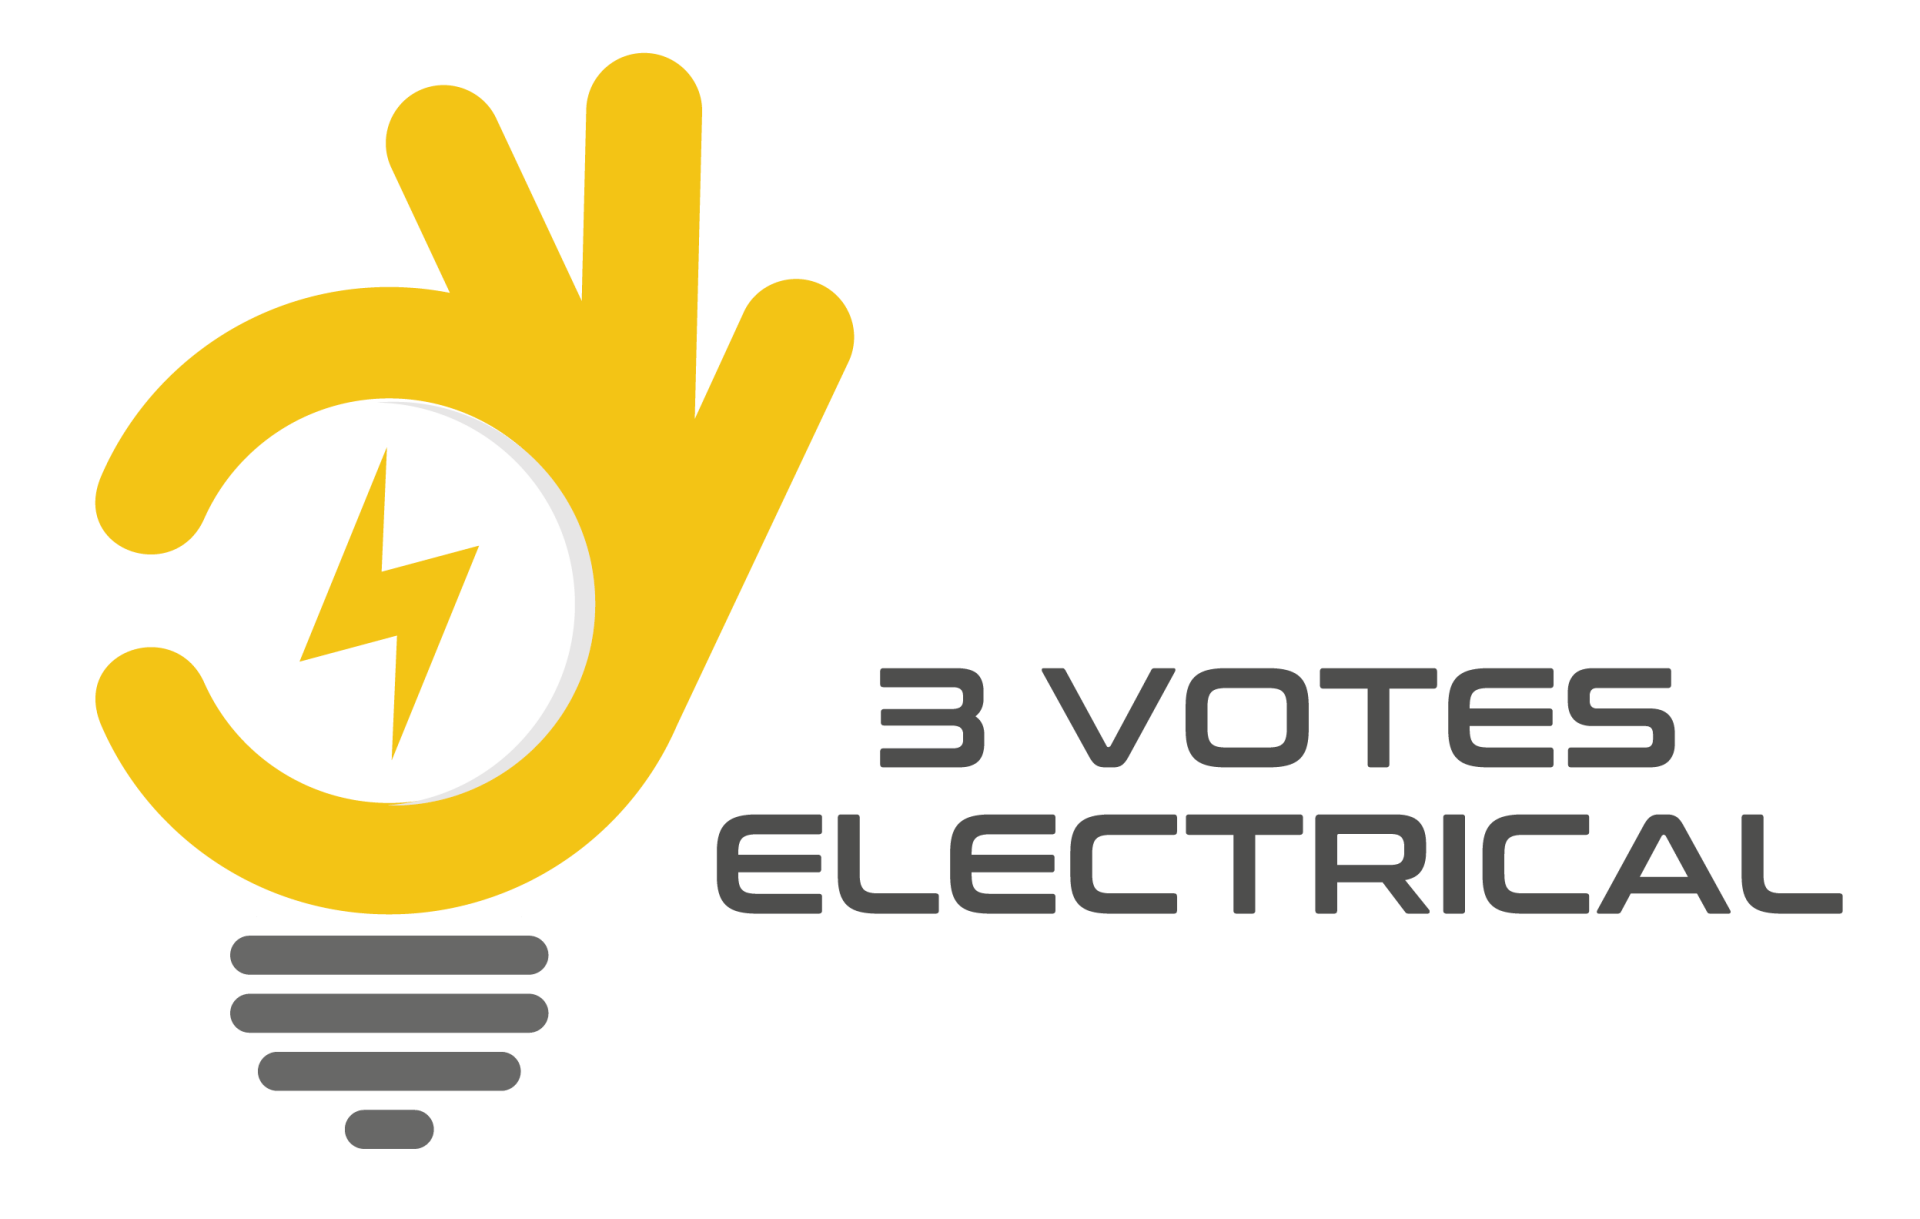 Modern, Masculine, Electrical Logo Design for NEXT LEVEL Electrical  Services by J.allauigan | Design #12545973